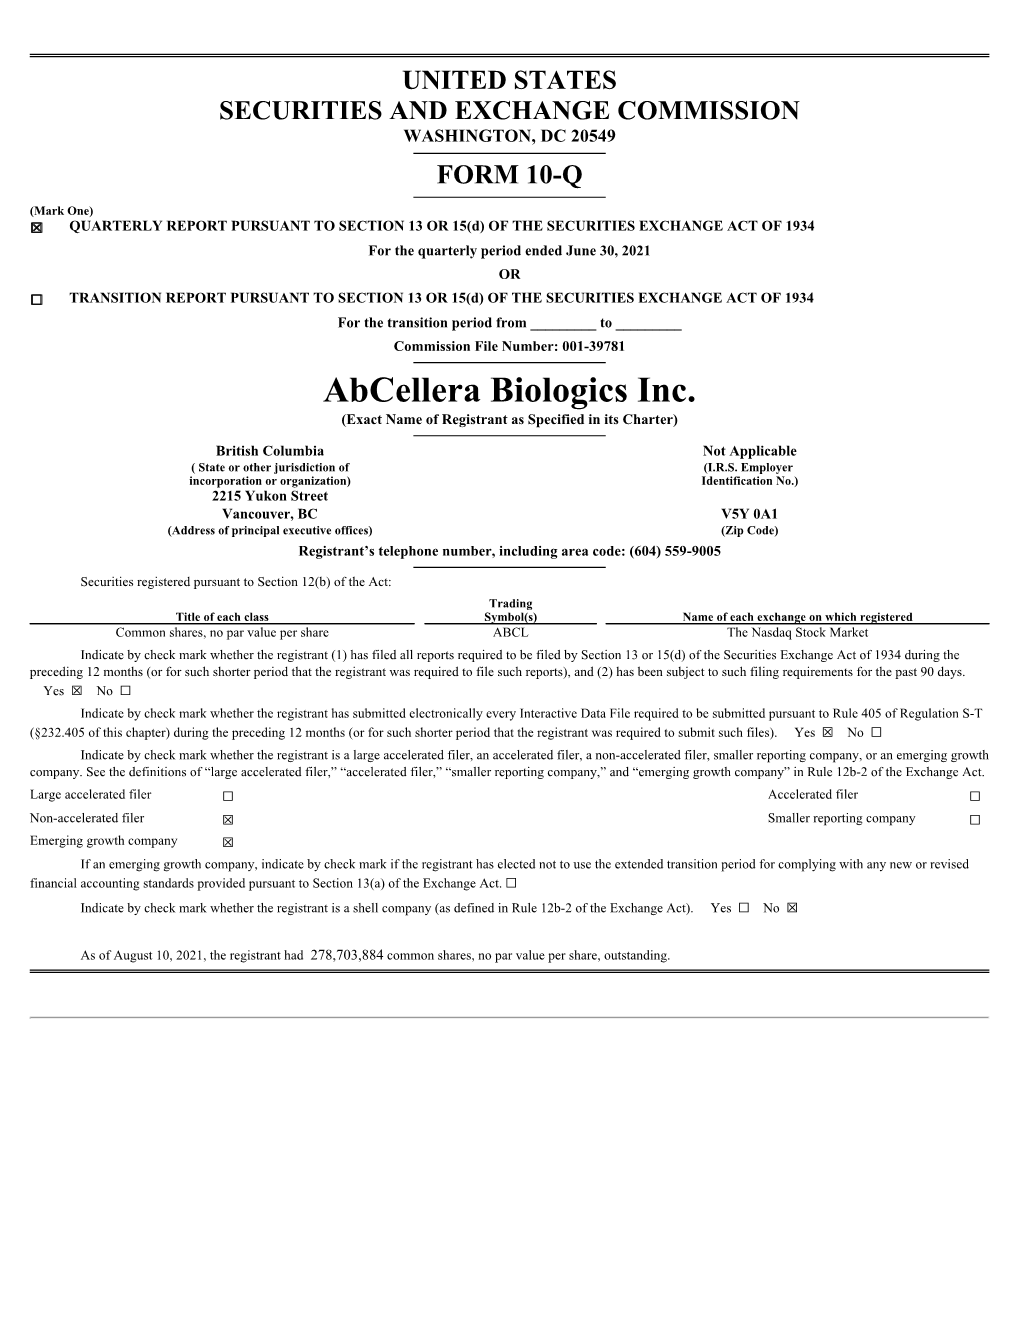 Abcellera Biologics Inc. (Exact Name of Registrant As Specified in Its Charter)